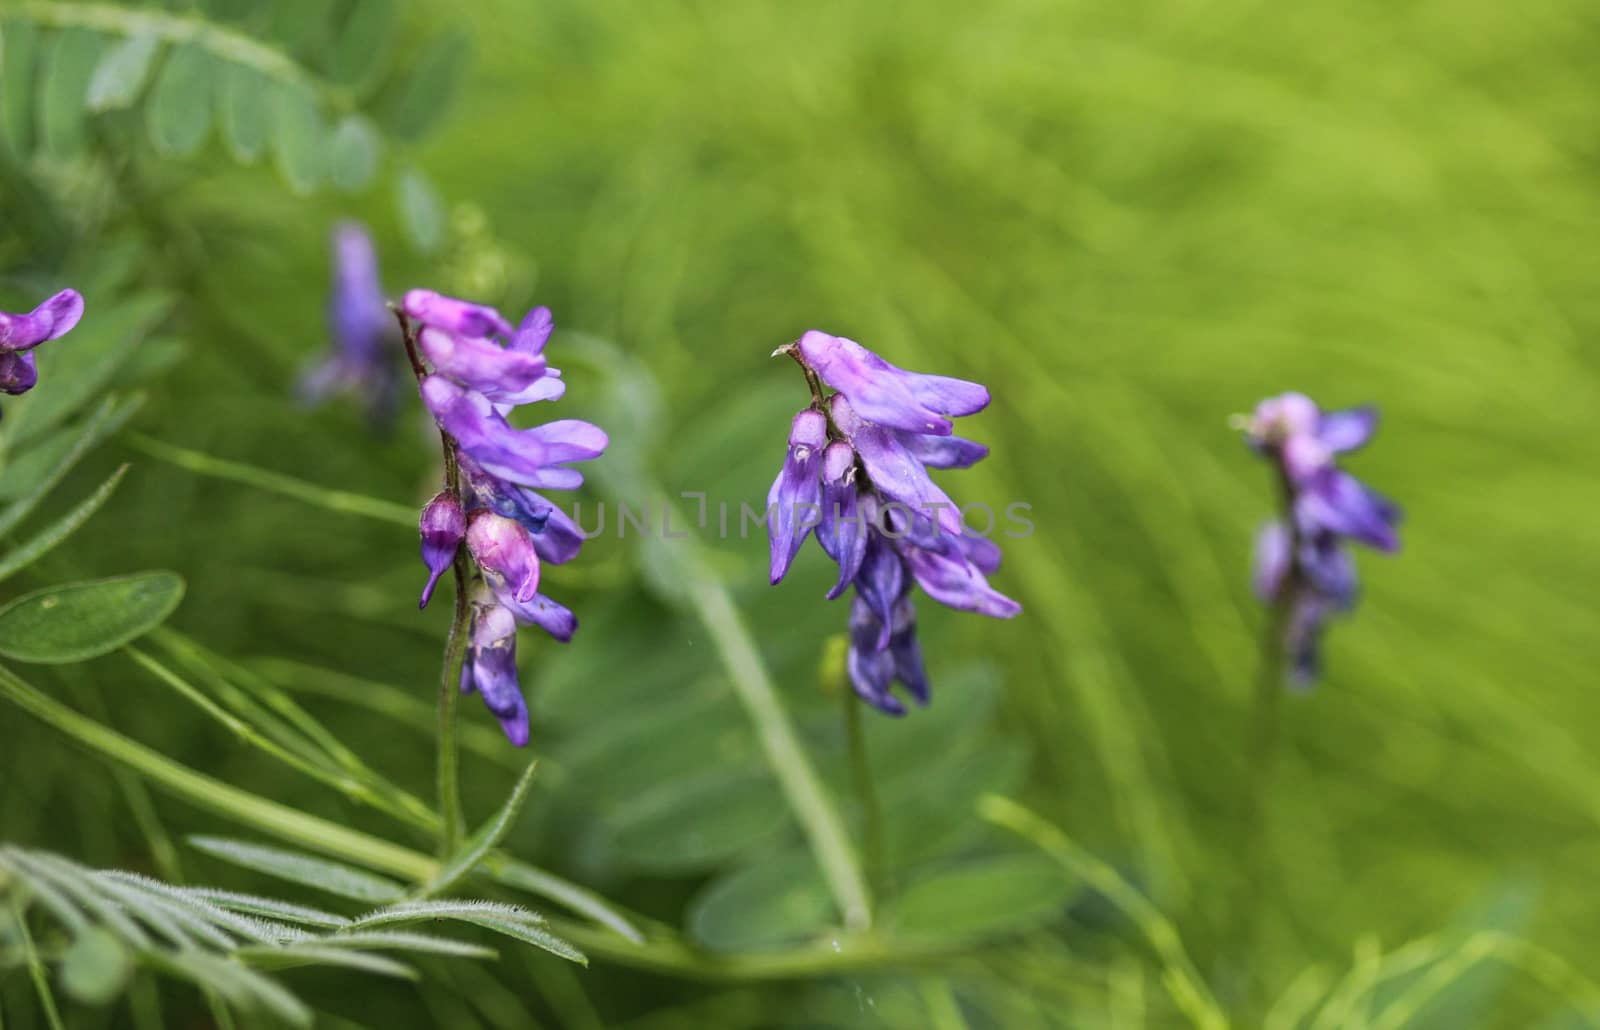 Close up of Vicia villosa flower, known as the hairy vetch, fodder vetch or winter vetch